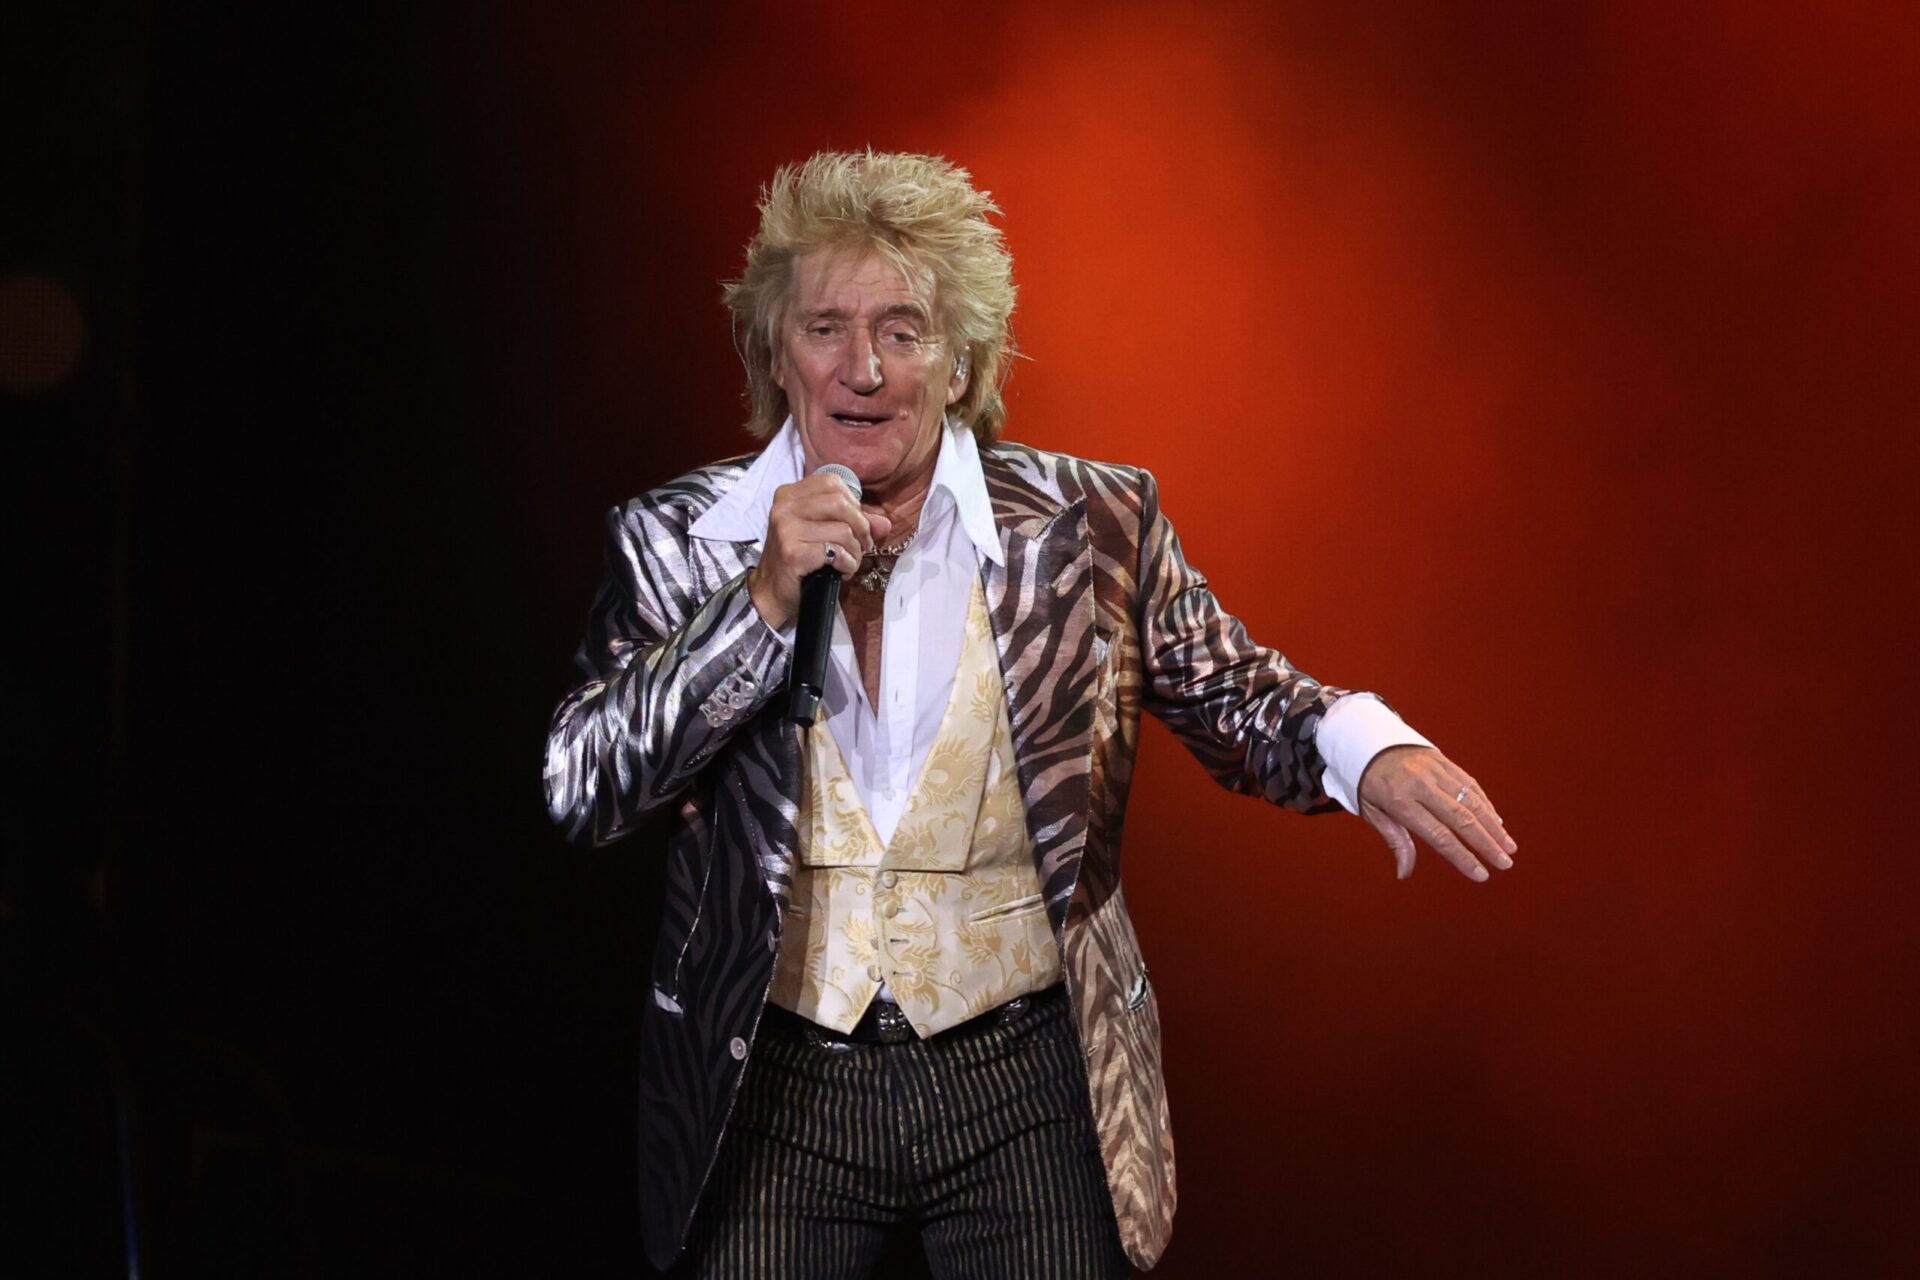 Image of Rod Stewart performing on a set